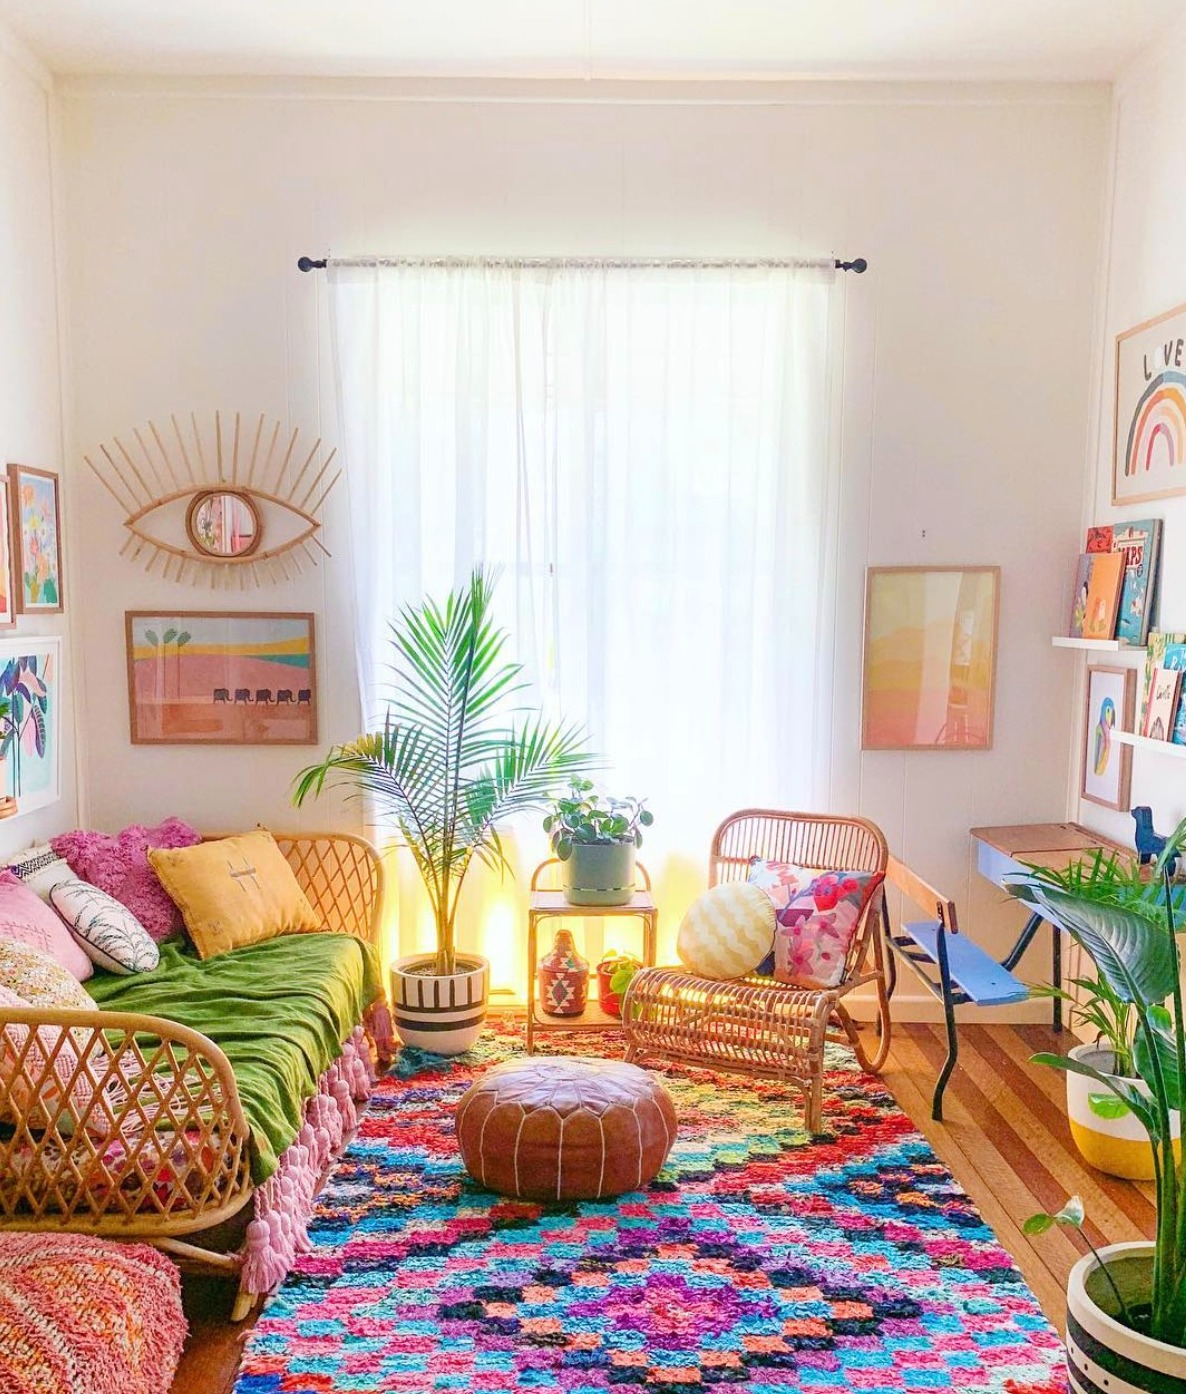 Modern boho living room with a colourful patterned rug, bamboo furniture, and lots of colourful art on the walls